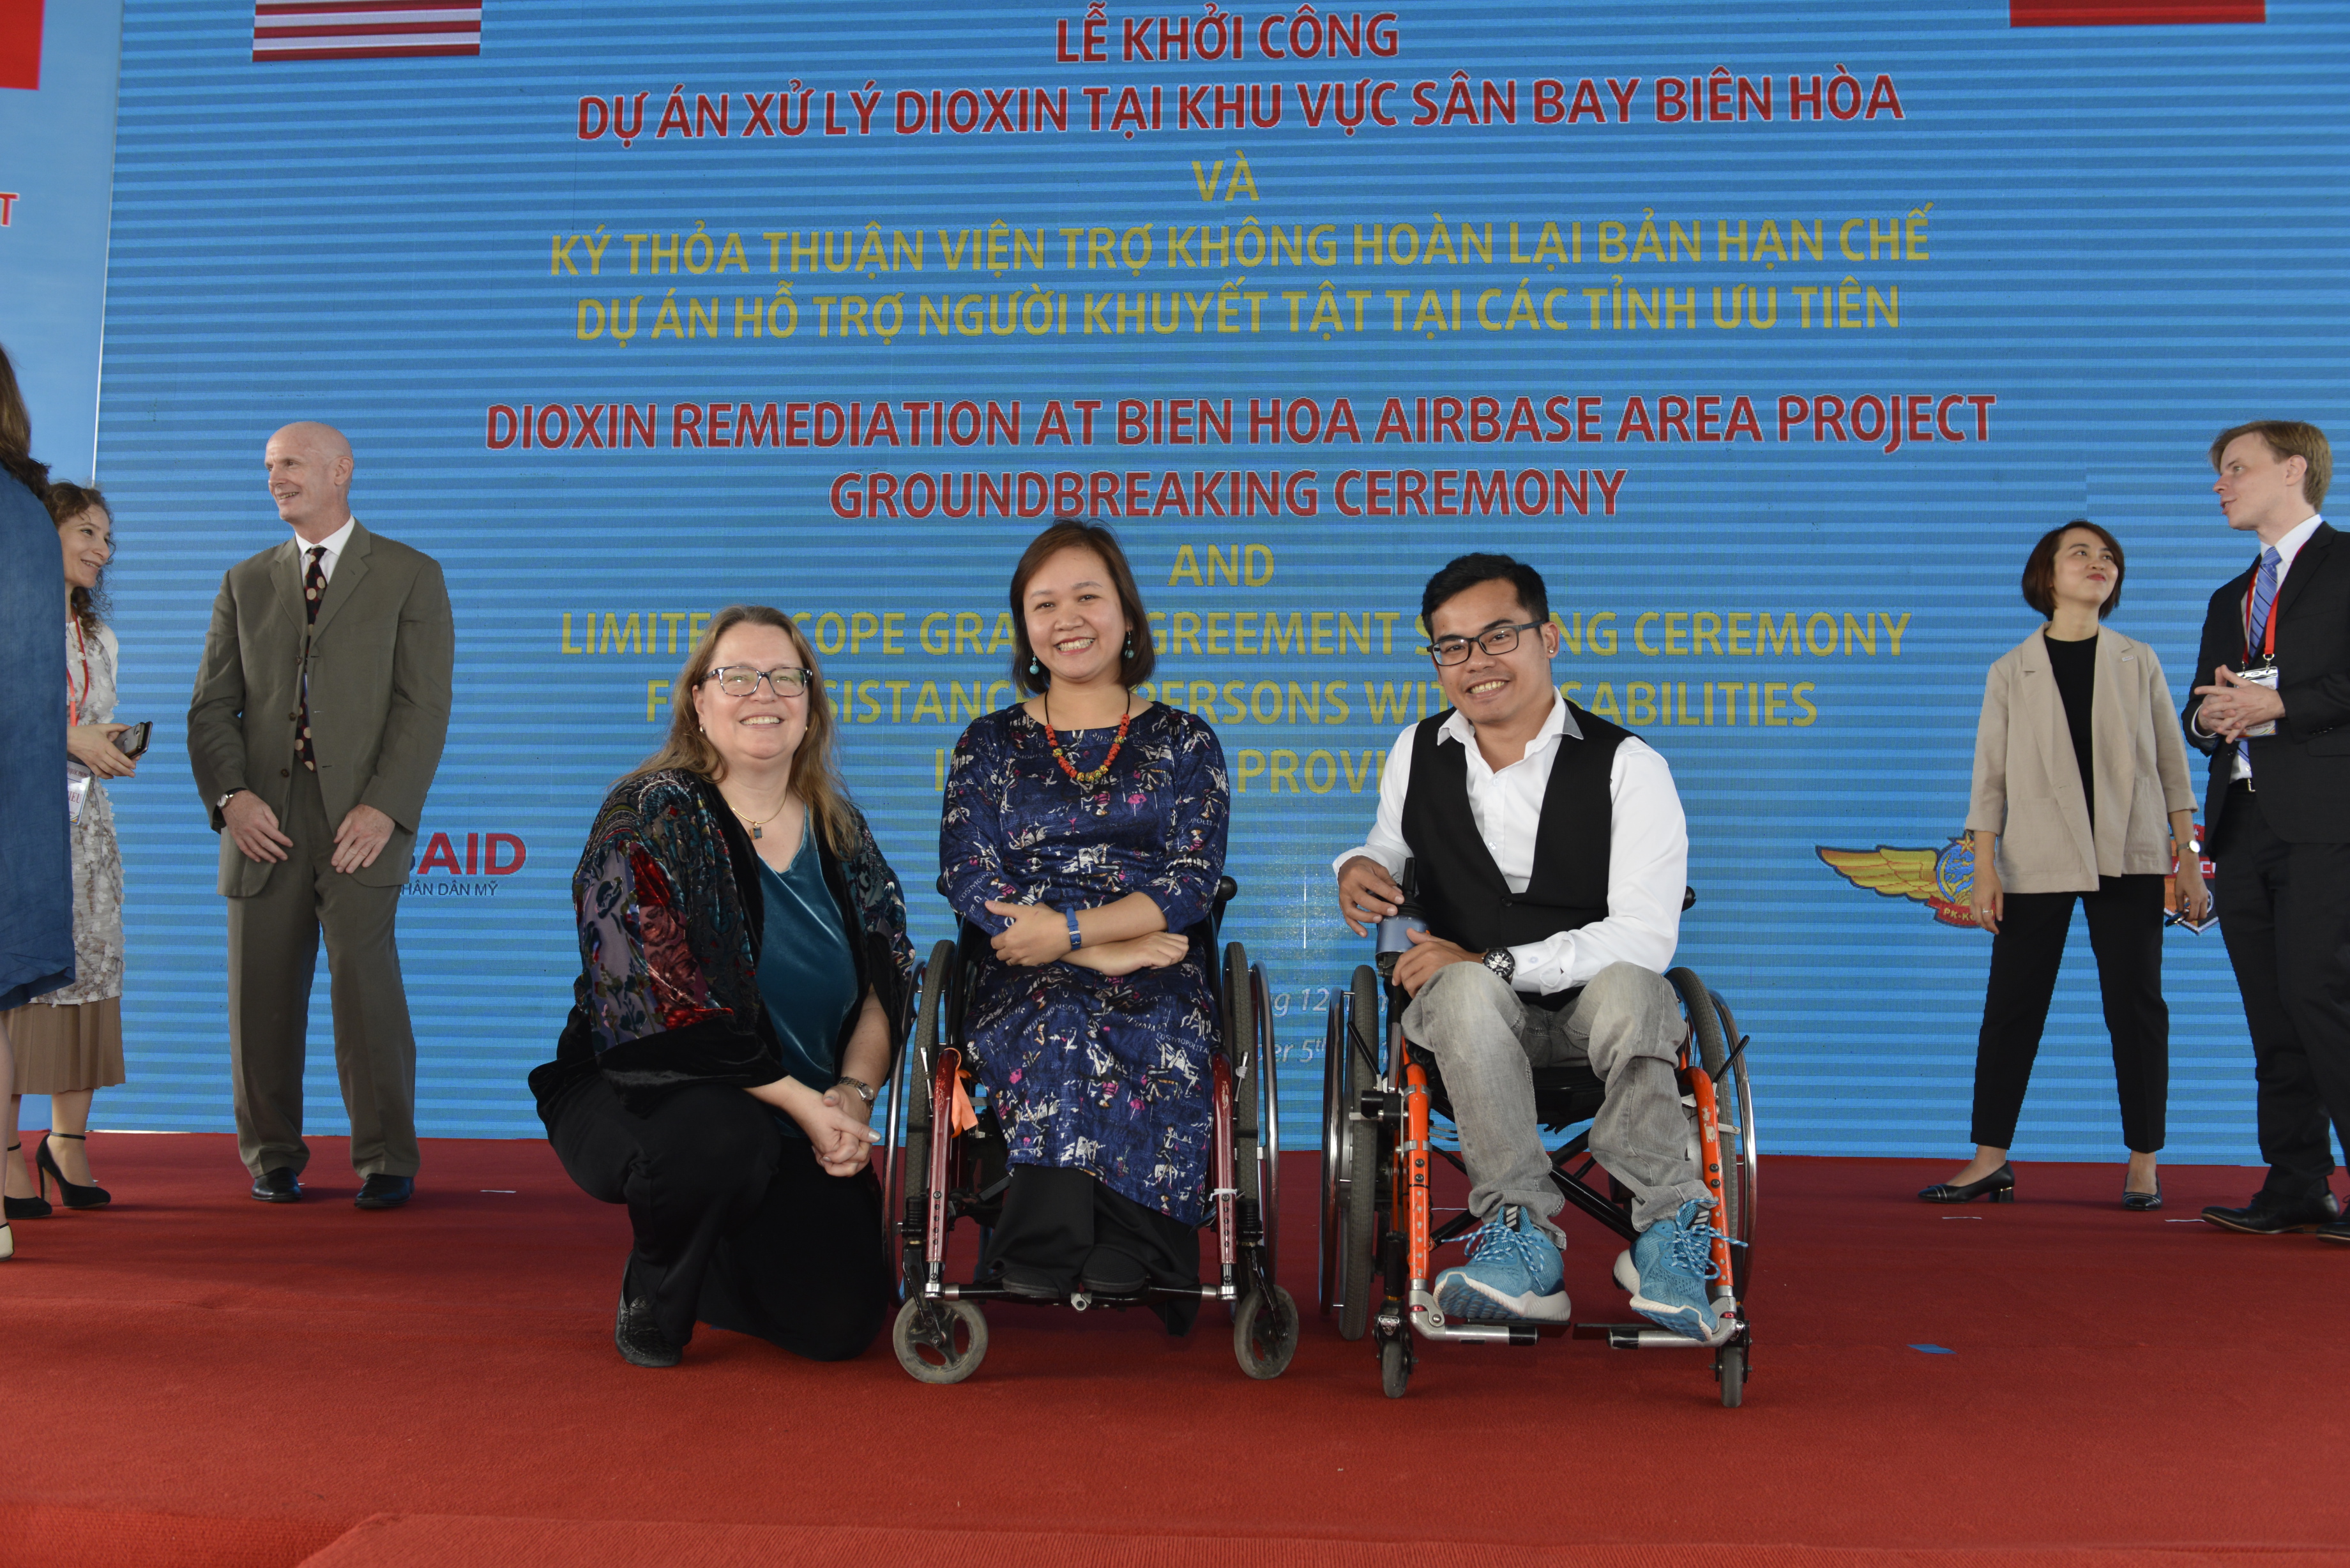 Disabled people attend the launch of a program to support persons with disabilities in Vietnam at Bien Hoa Airbase in Bien Hoa City, Dong Nai Province in southern Vietnam on December 5, 2019. Photo: USAID